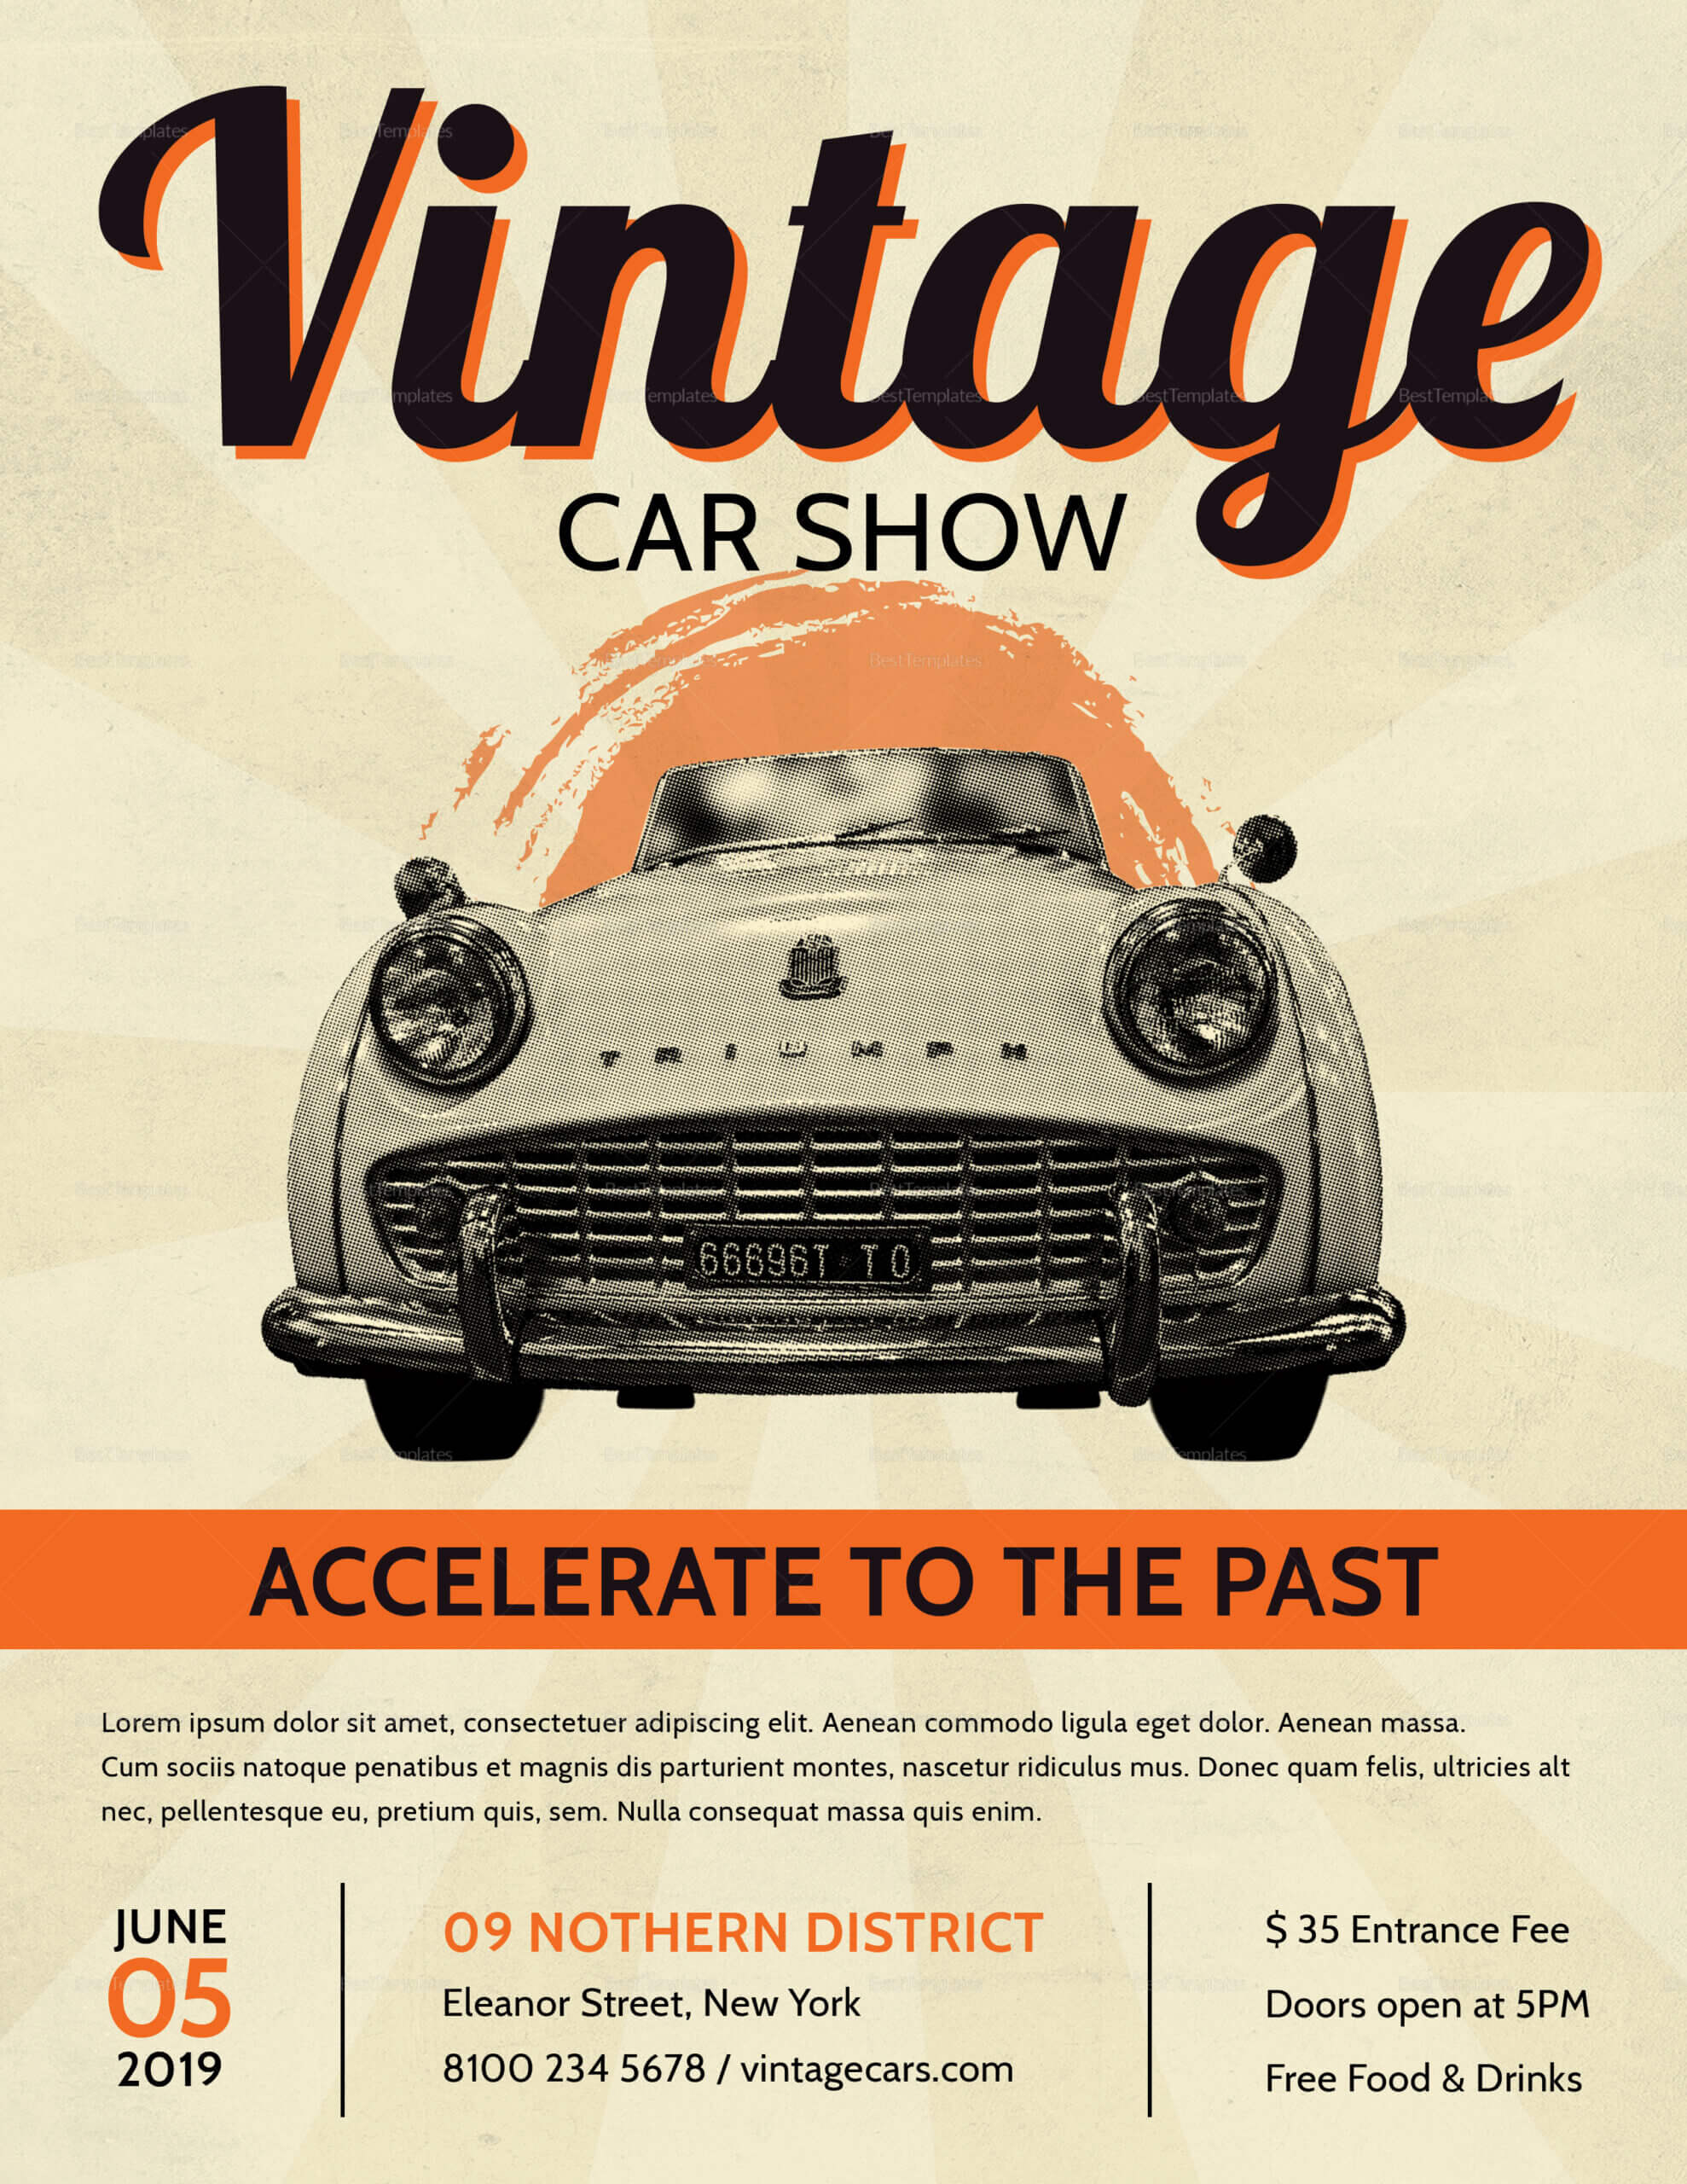 006 Car Show Flyer Template Vintage Outstanding Ideas Free Intended For Car Show Flyer Template